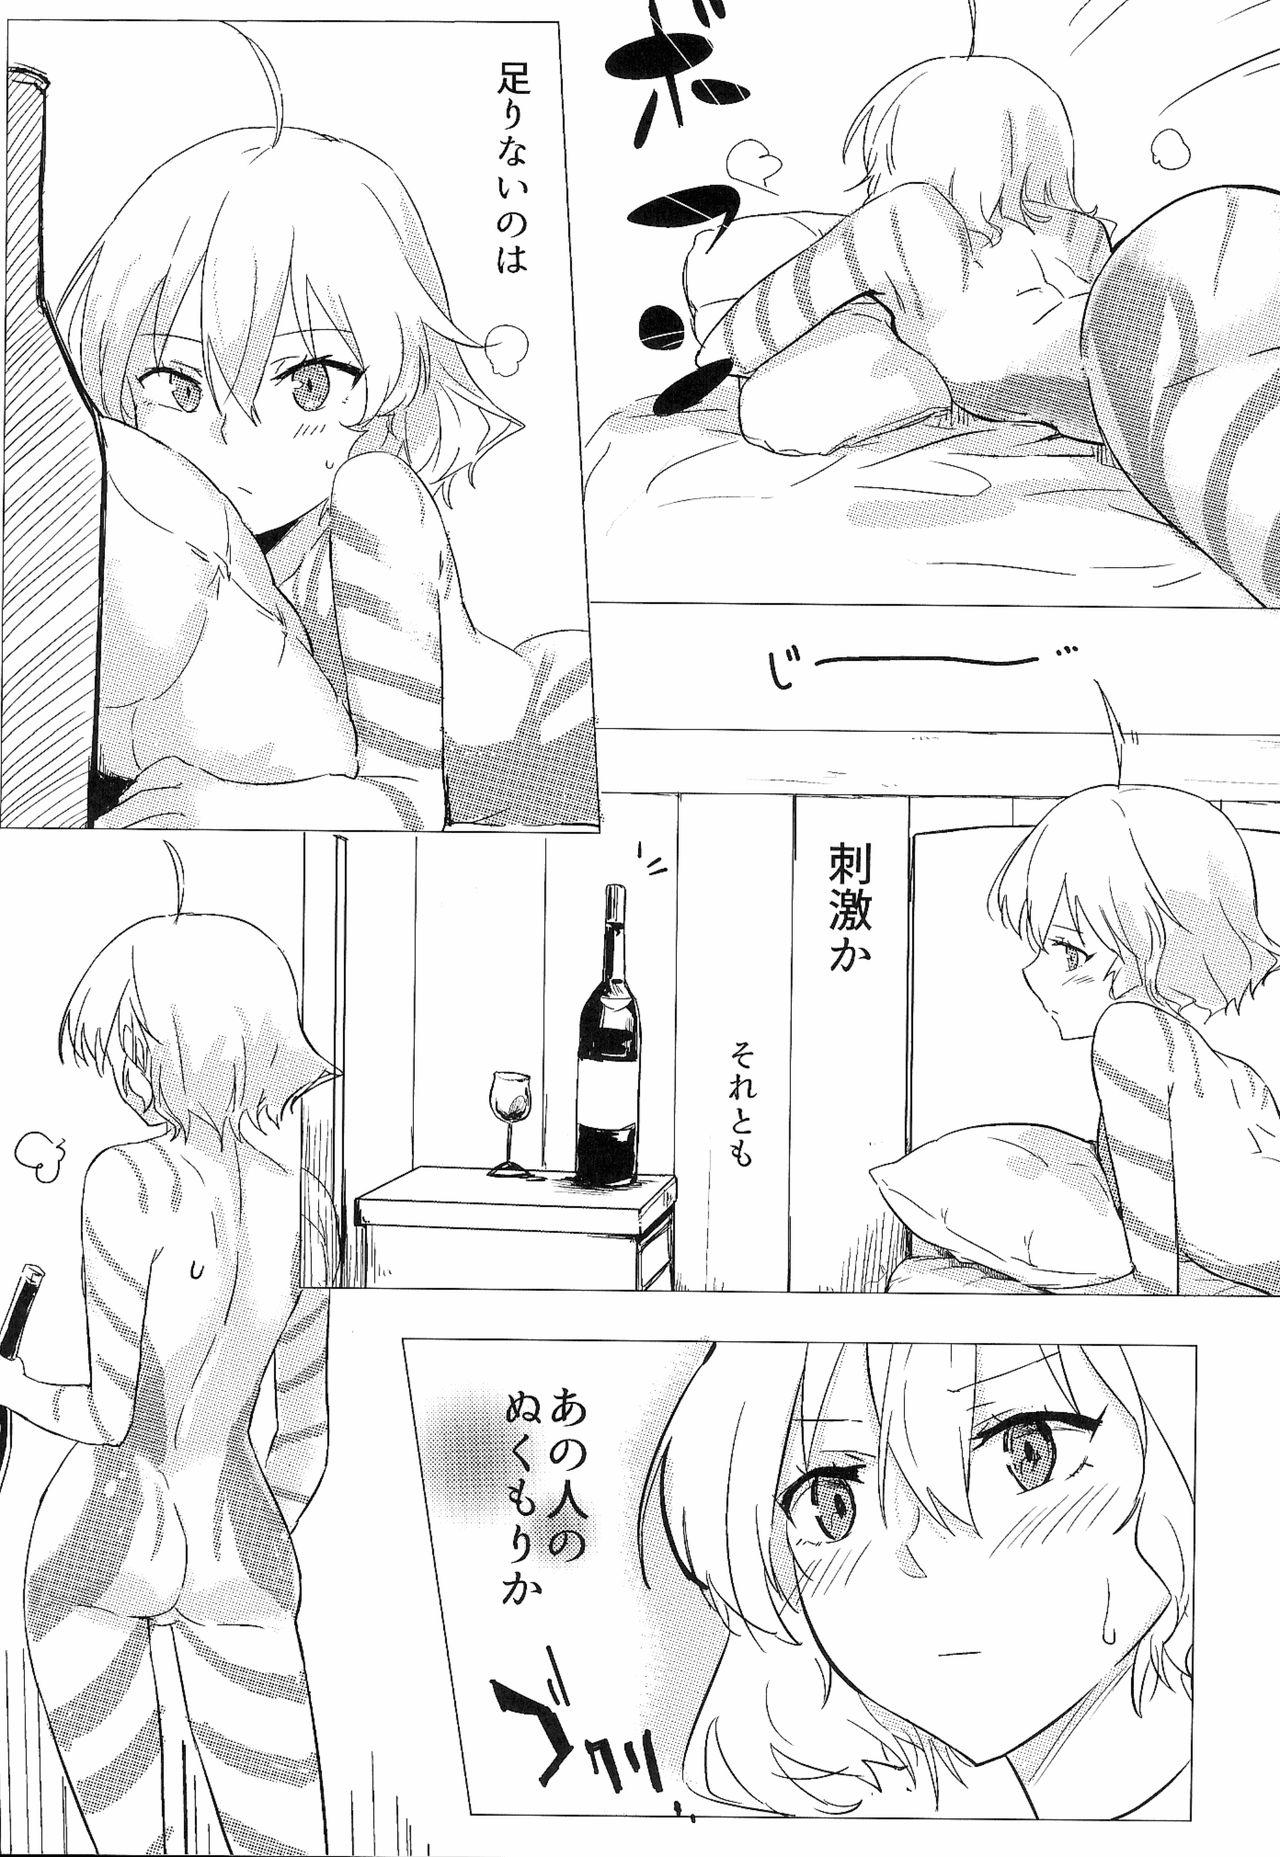 Casting Wine-Red Orgasm - Akuma no riddle Edging - Page 8